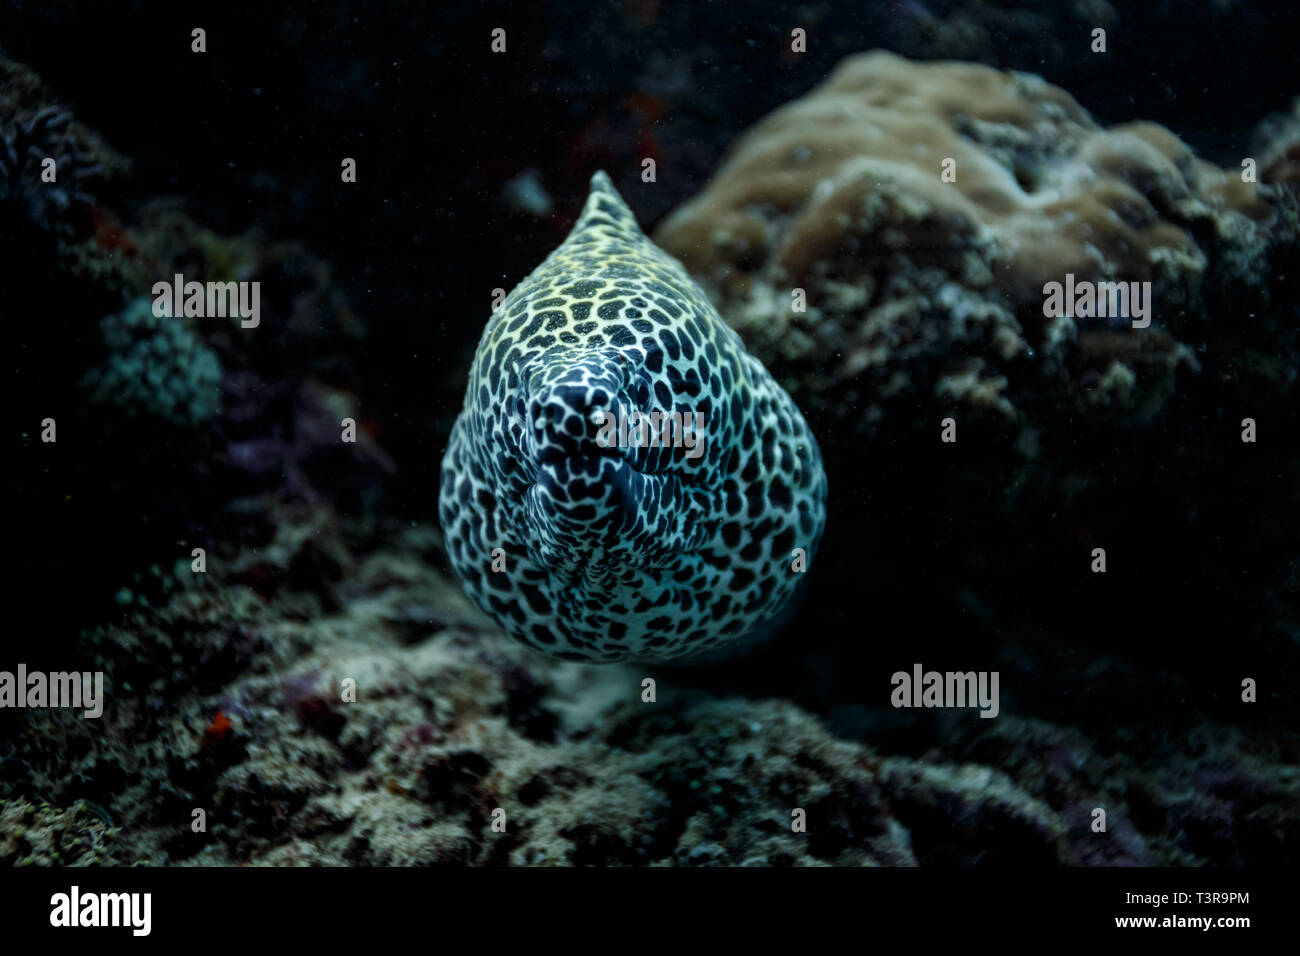 Closeup of yellow spotted moray eel face Stock Photo